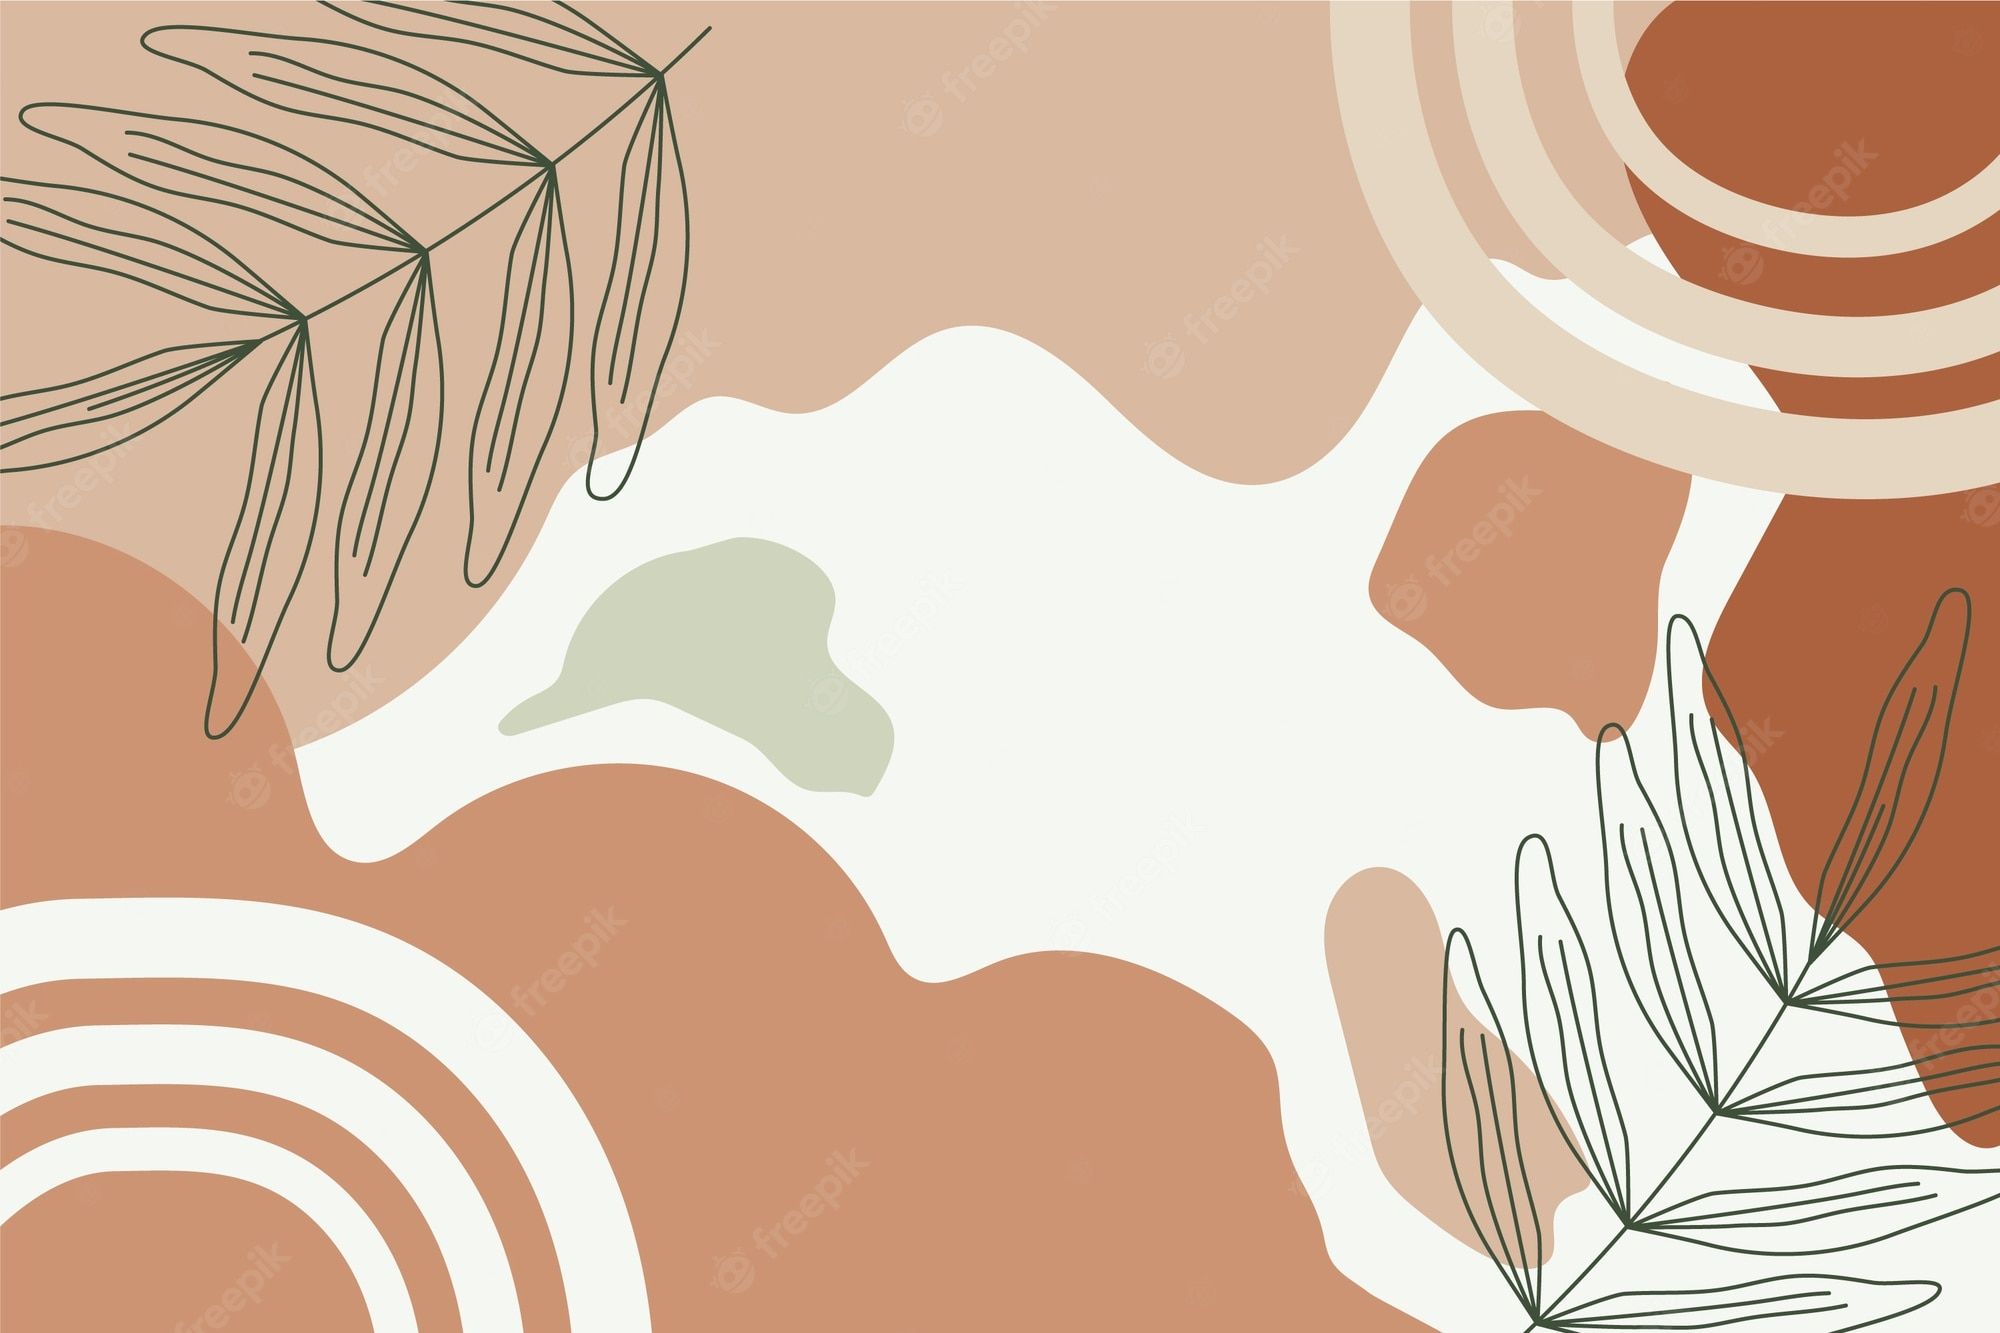 A background image with abstract shapes and leaves - Terracotta